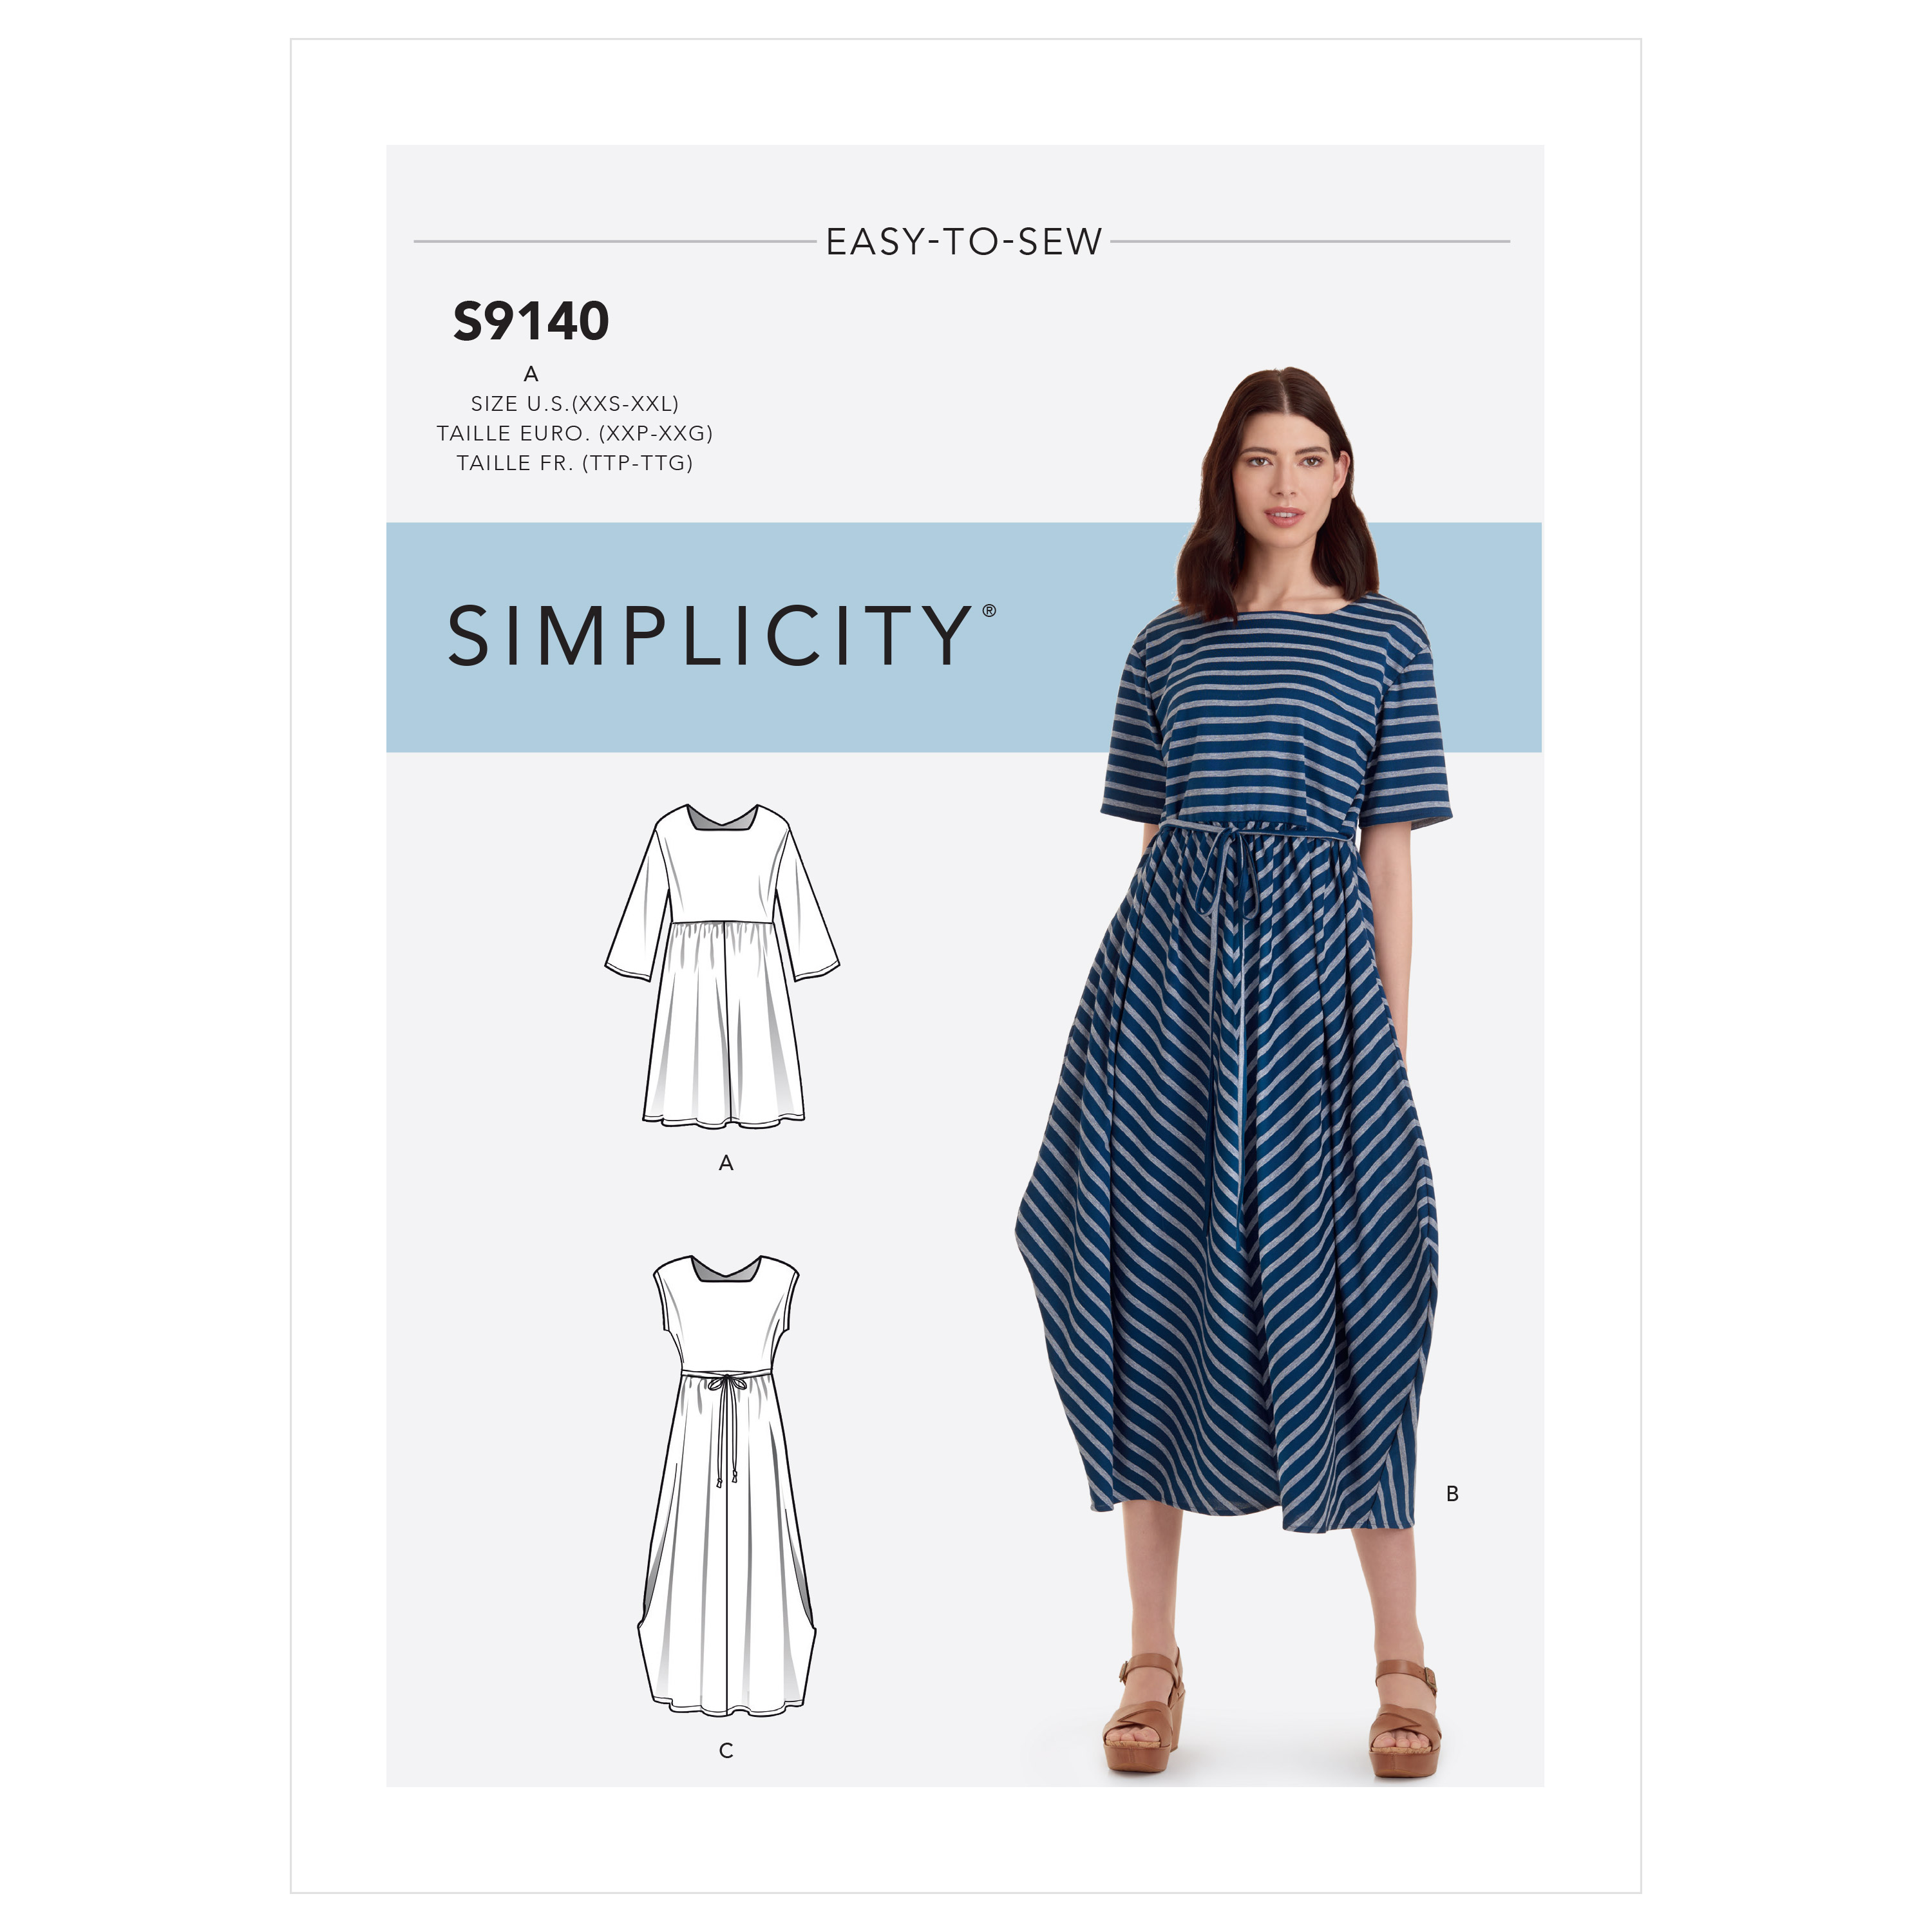 https://images.patternreview.com/sewing/patterns/simplicity/2020/9140/9140.jpg